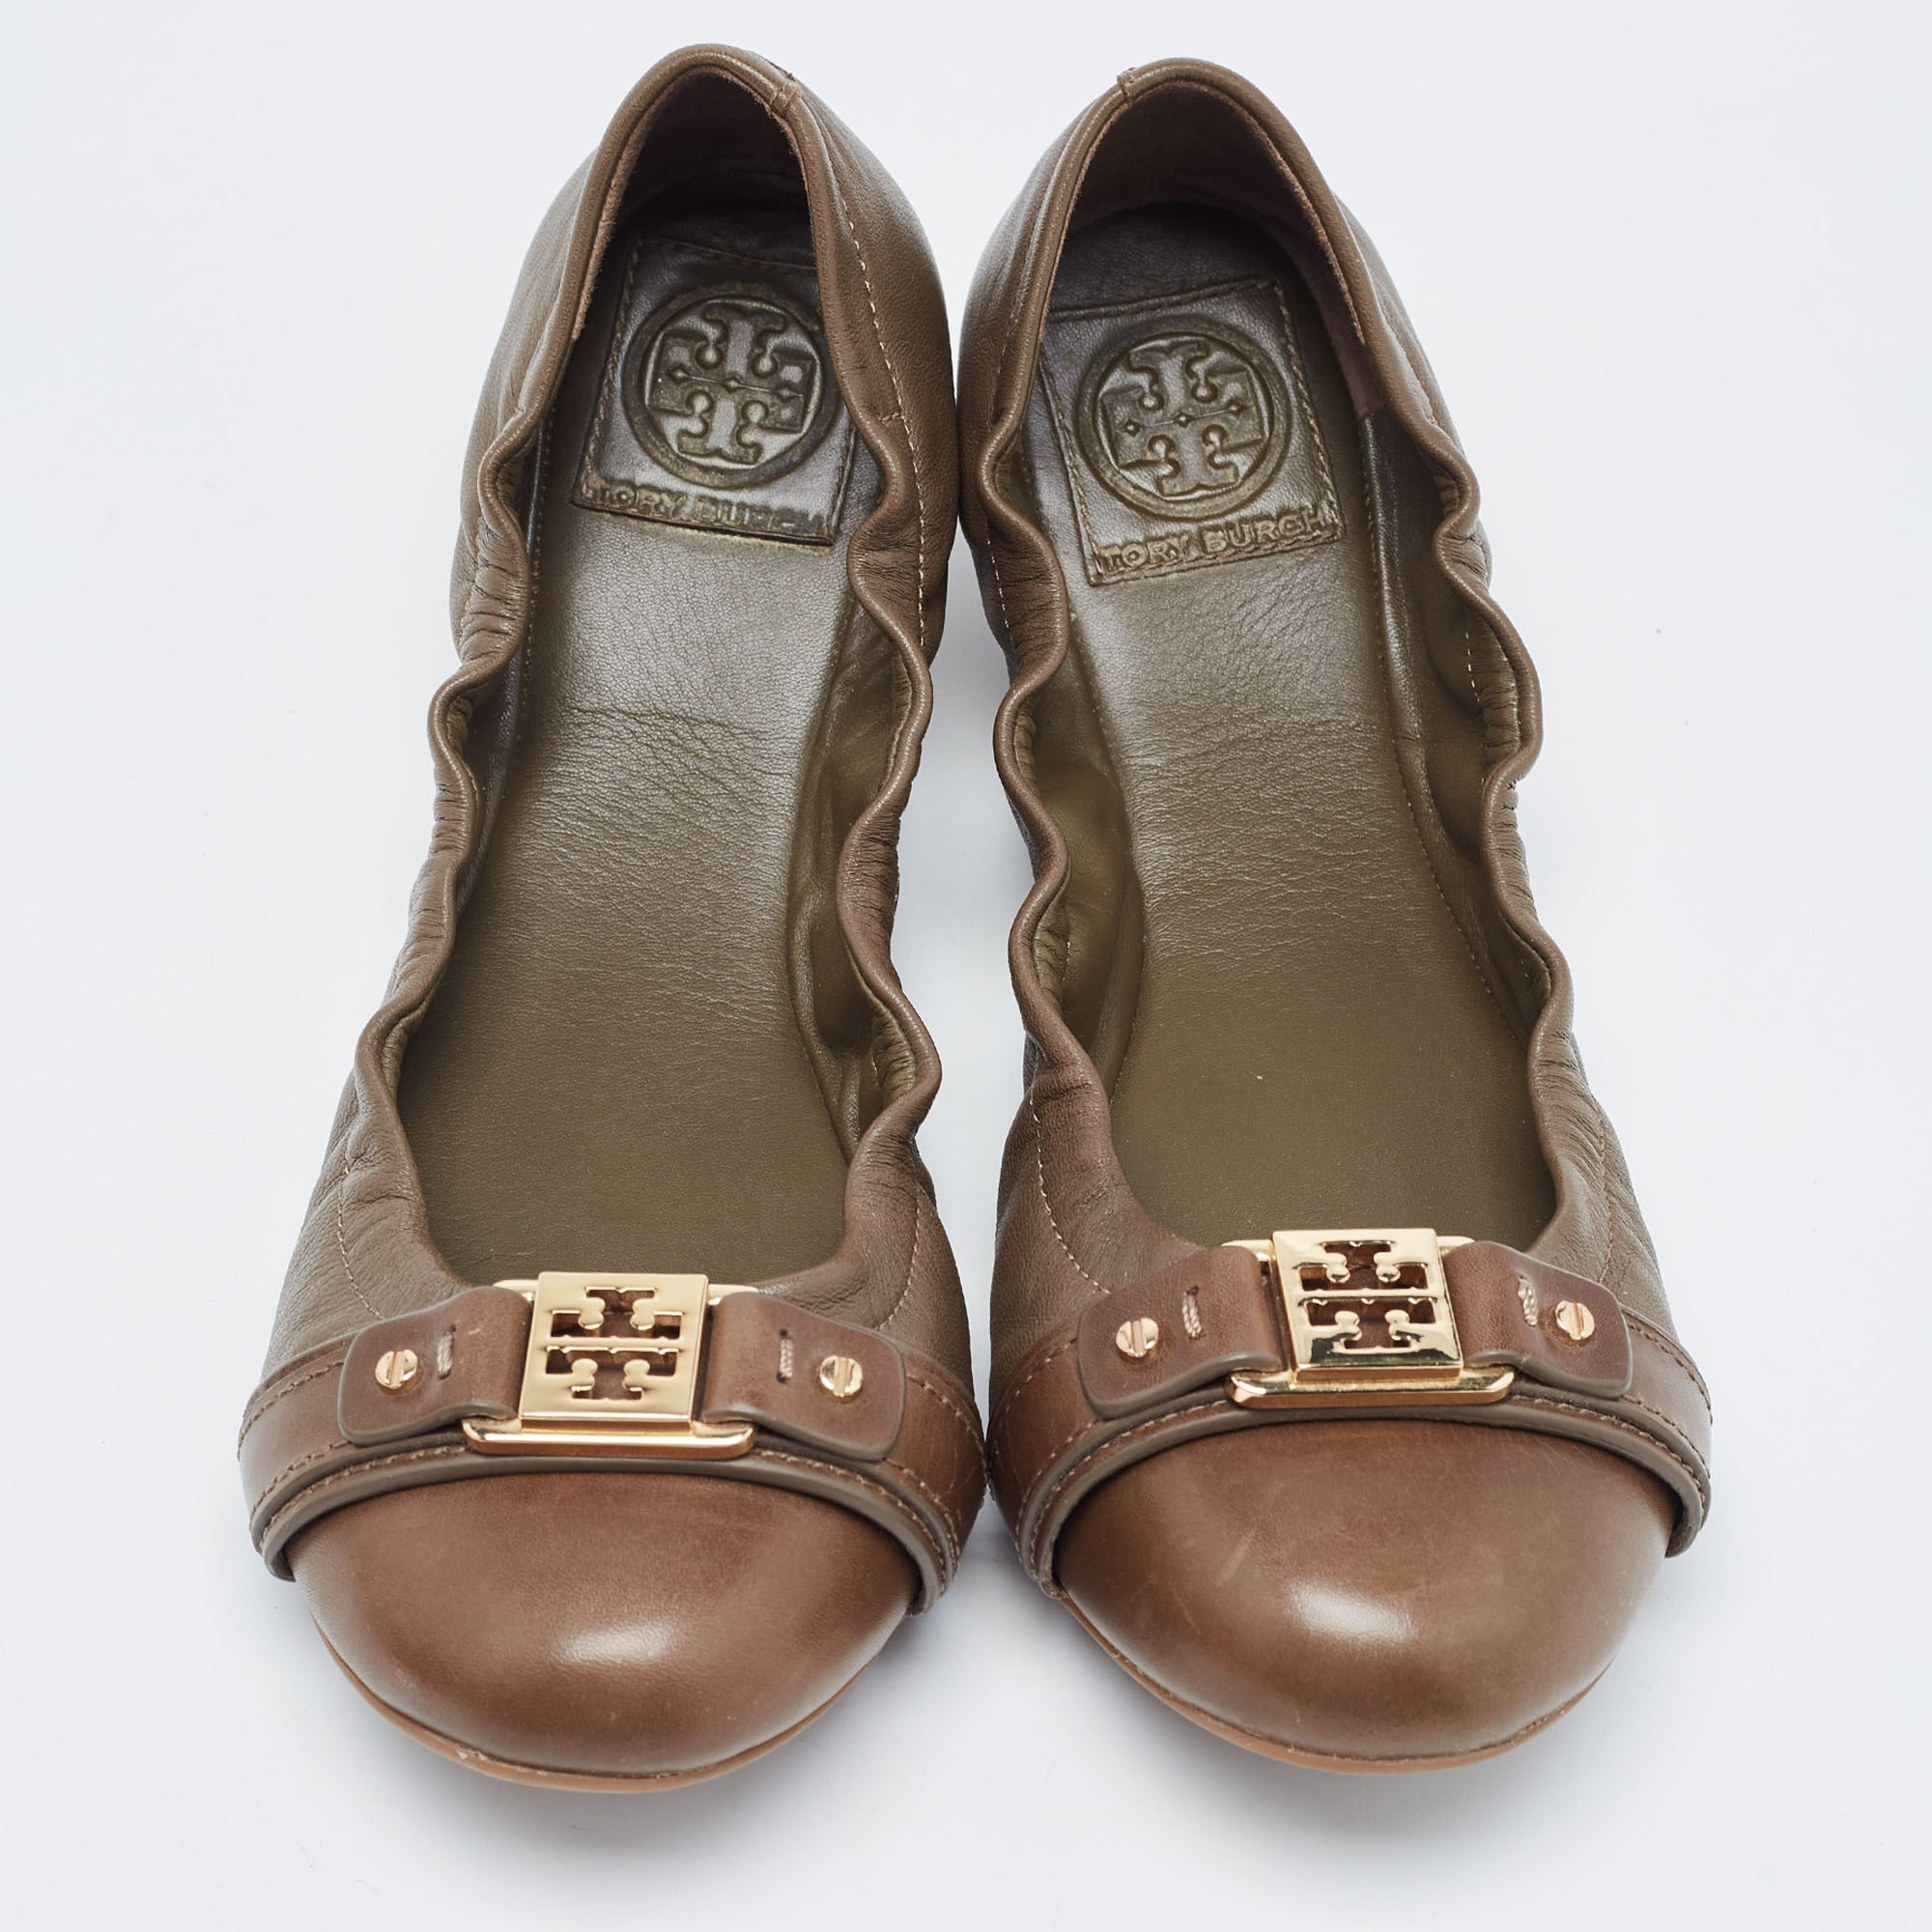 Tory Burch Brown Leather Ambrose Scrunch Ballet Flats Size 40